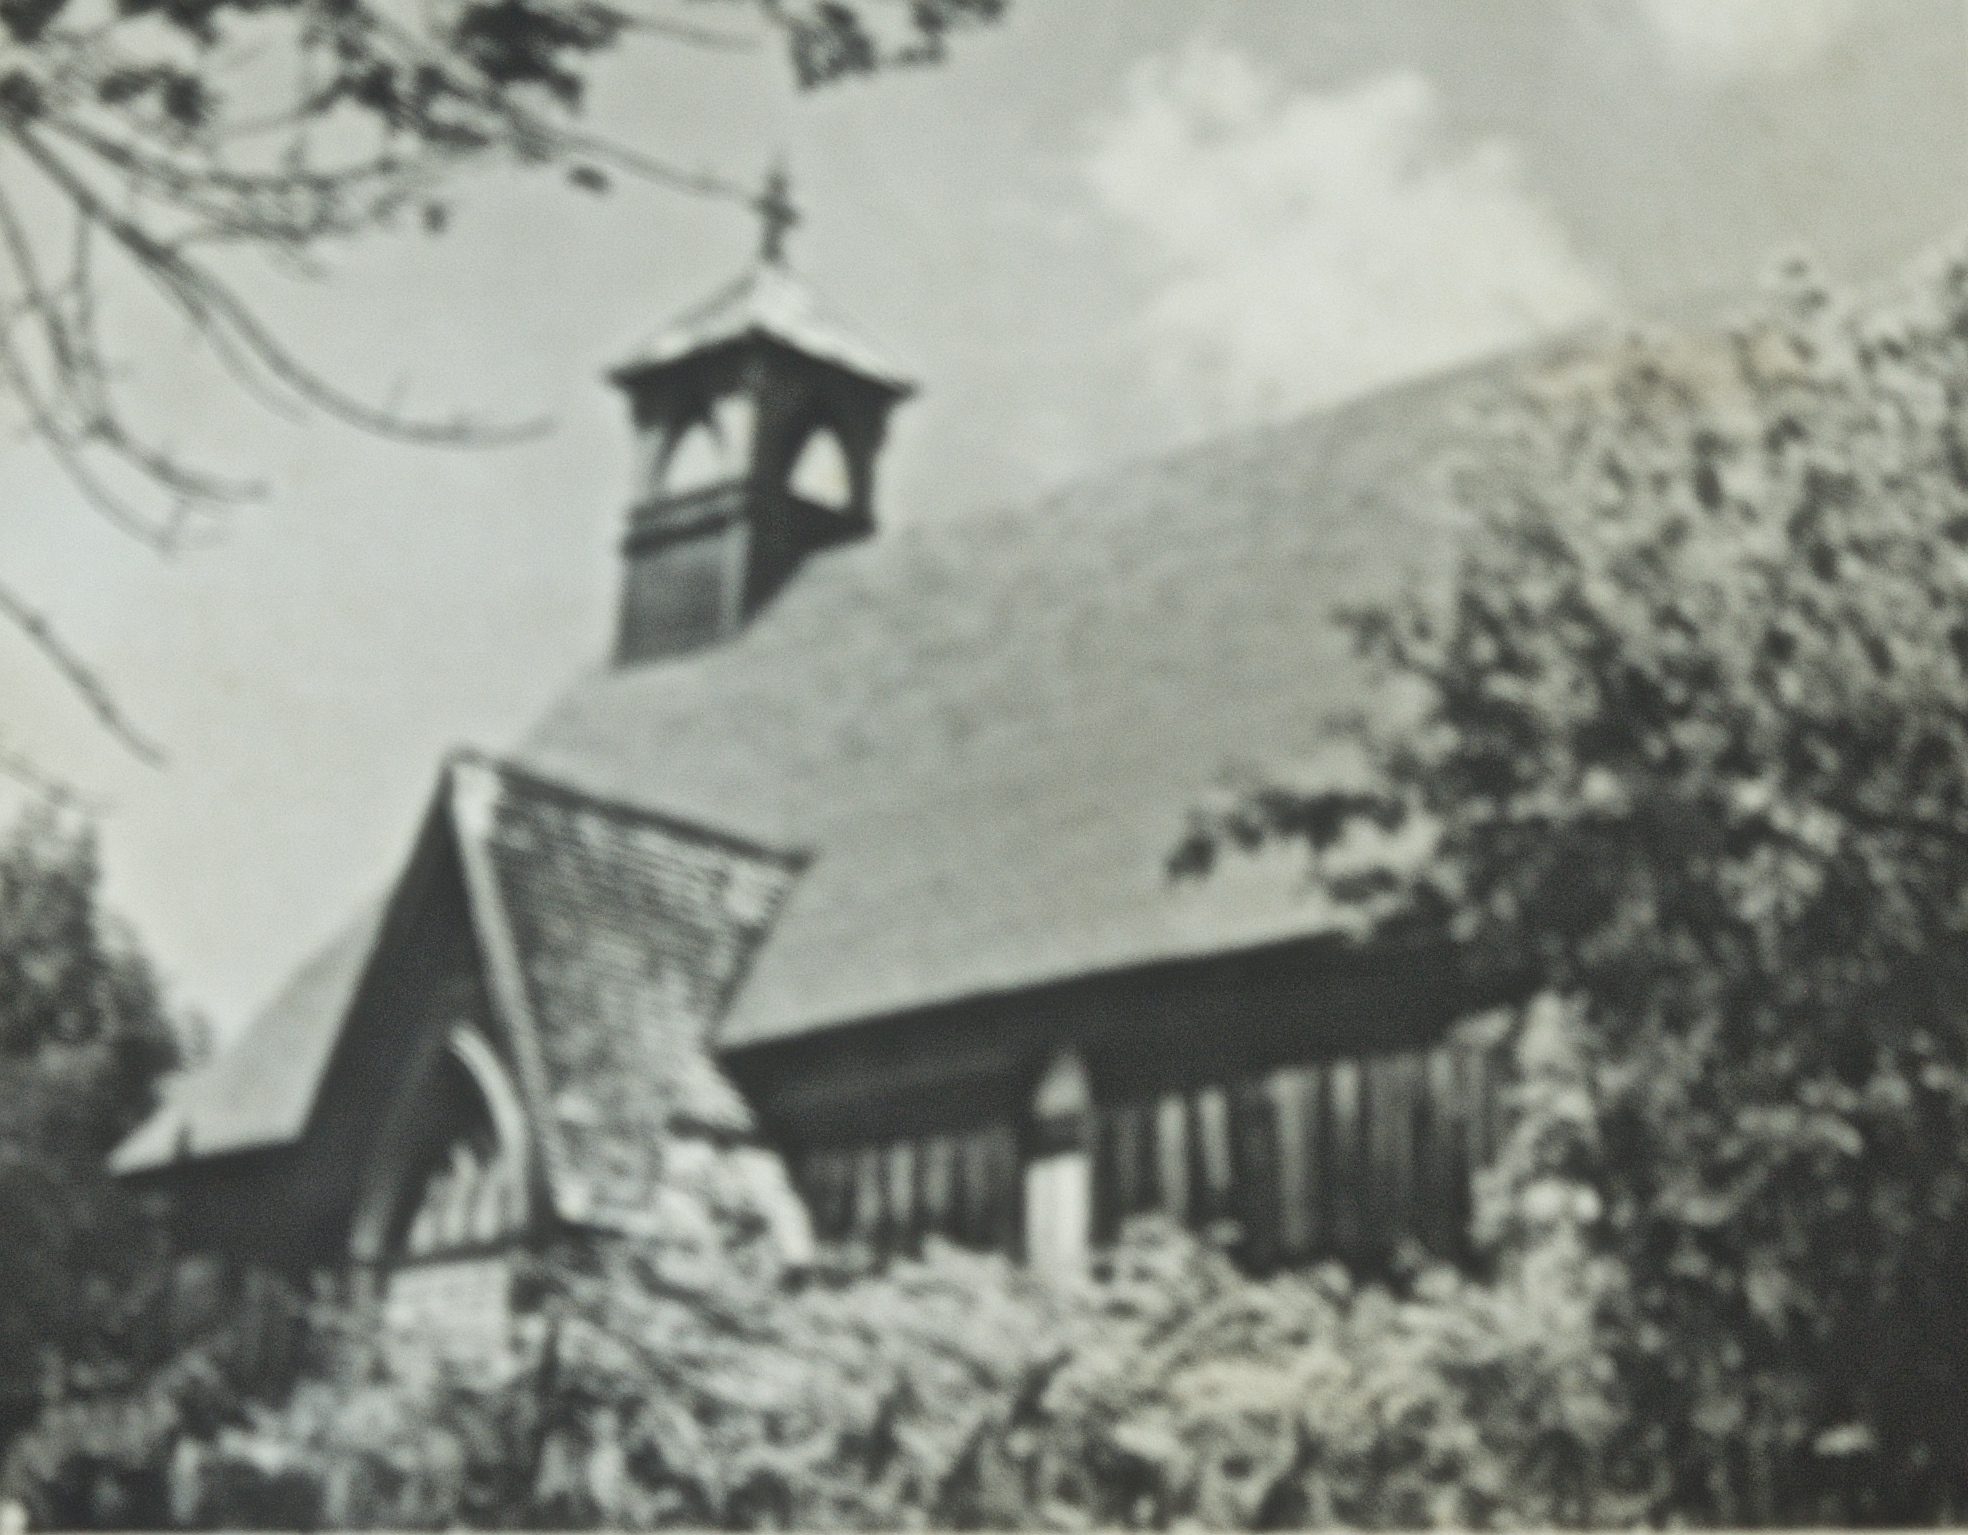 Black and white photograph of second St. James the Apostle "church on the hill."